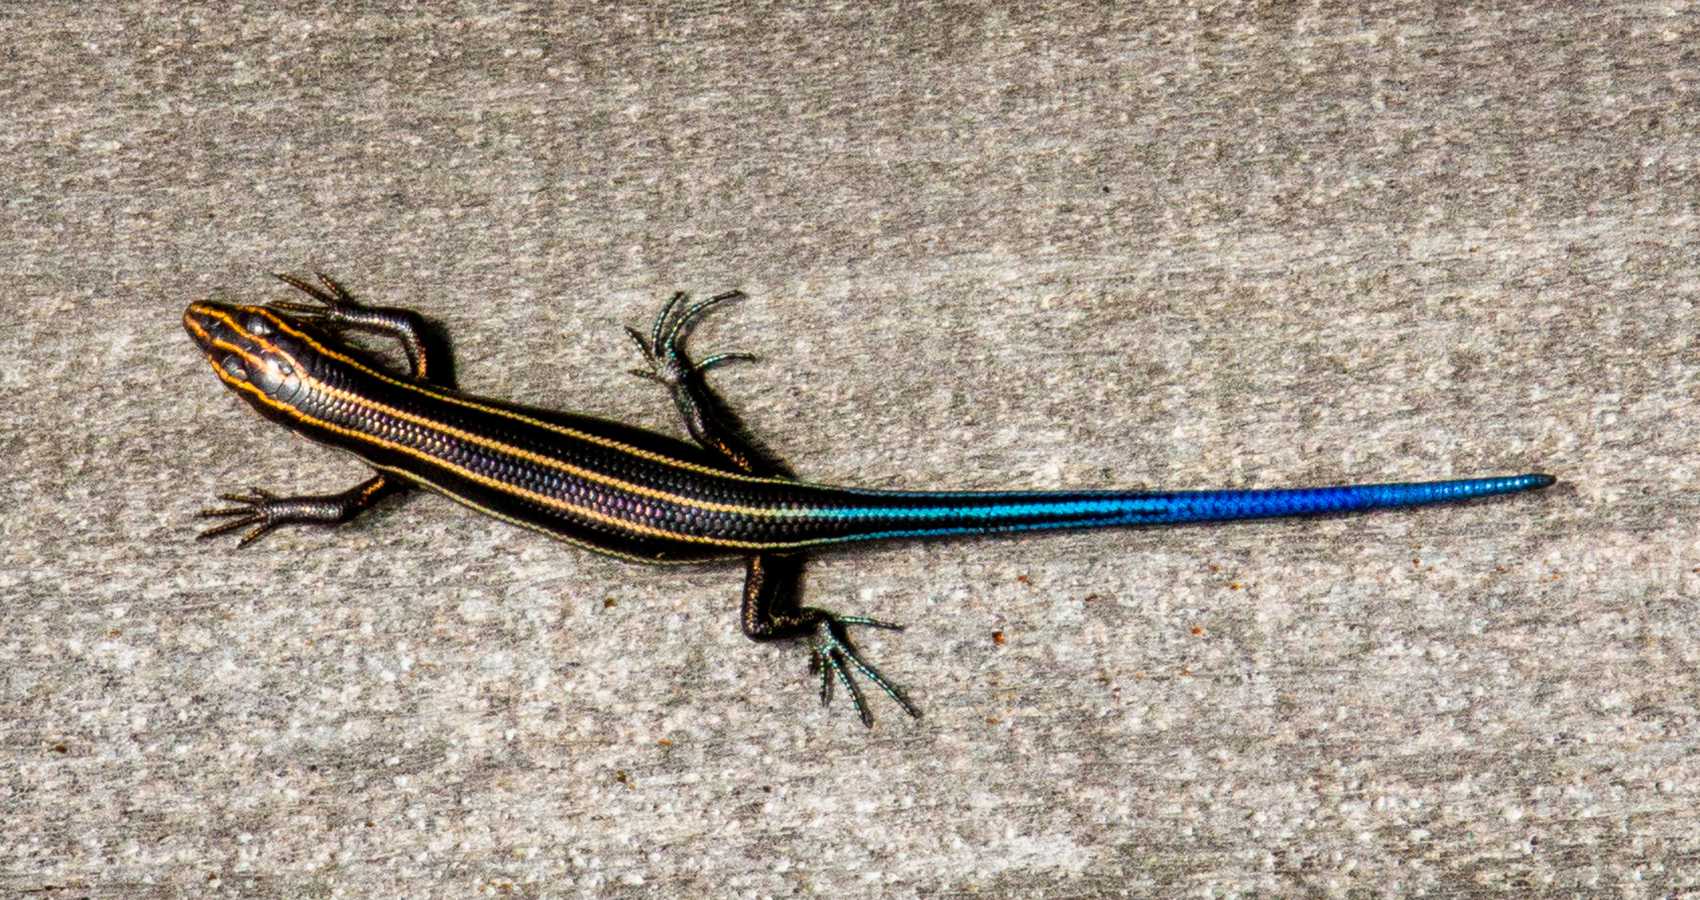 Ode to a Would-Be Swimmin’ Skink, a poem by Eric Robert Nolan at Spillwords.com